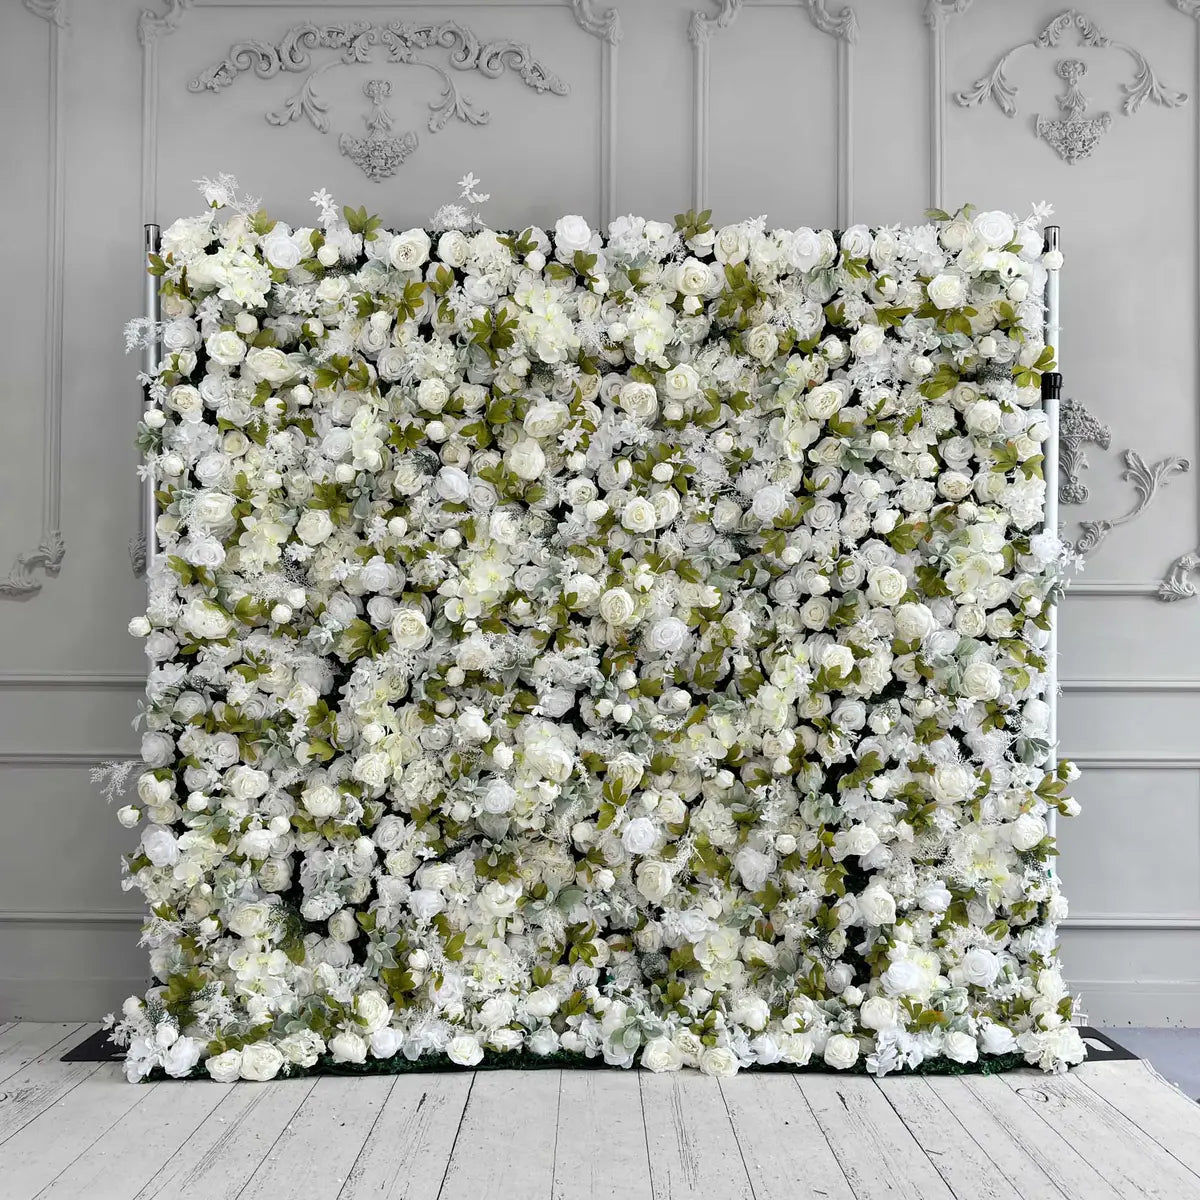 Flower Wall 3D White Peony Fabric Rolling Up Curtain Floral Backdrop Wedding Party Proposal Decor